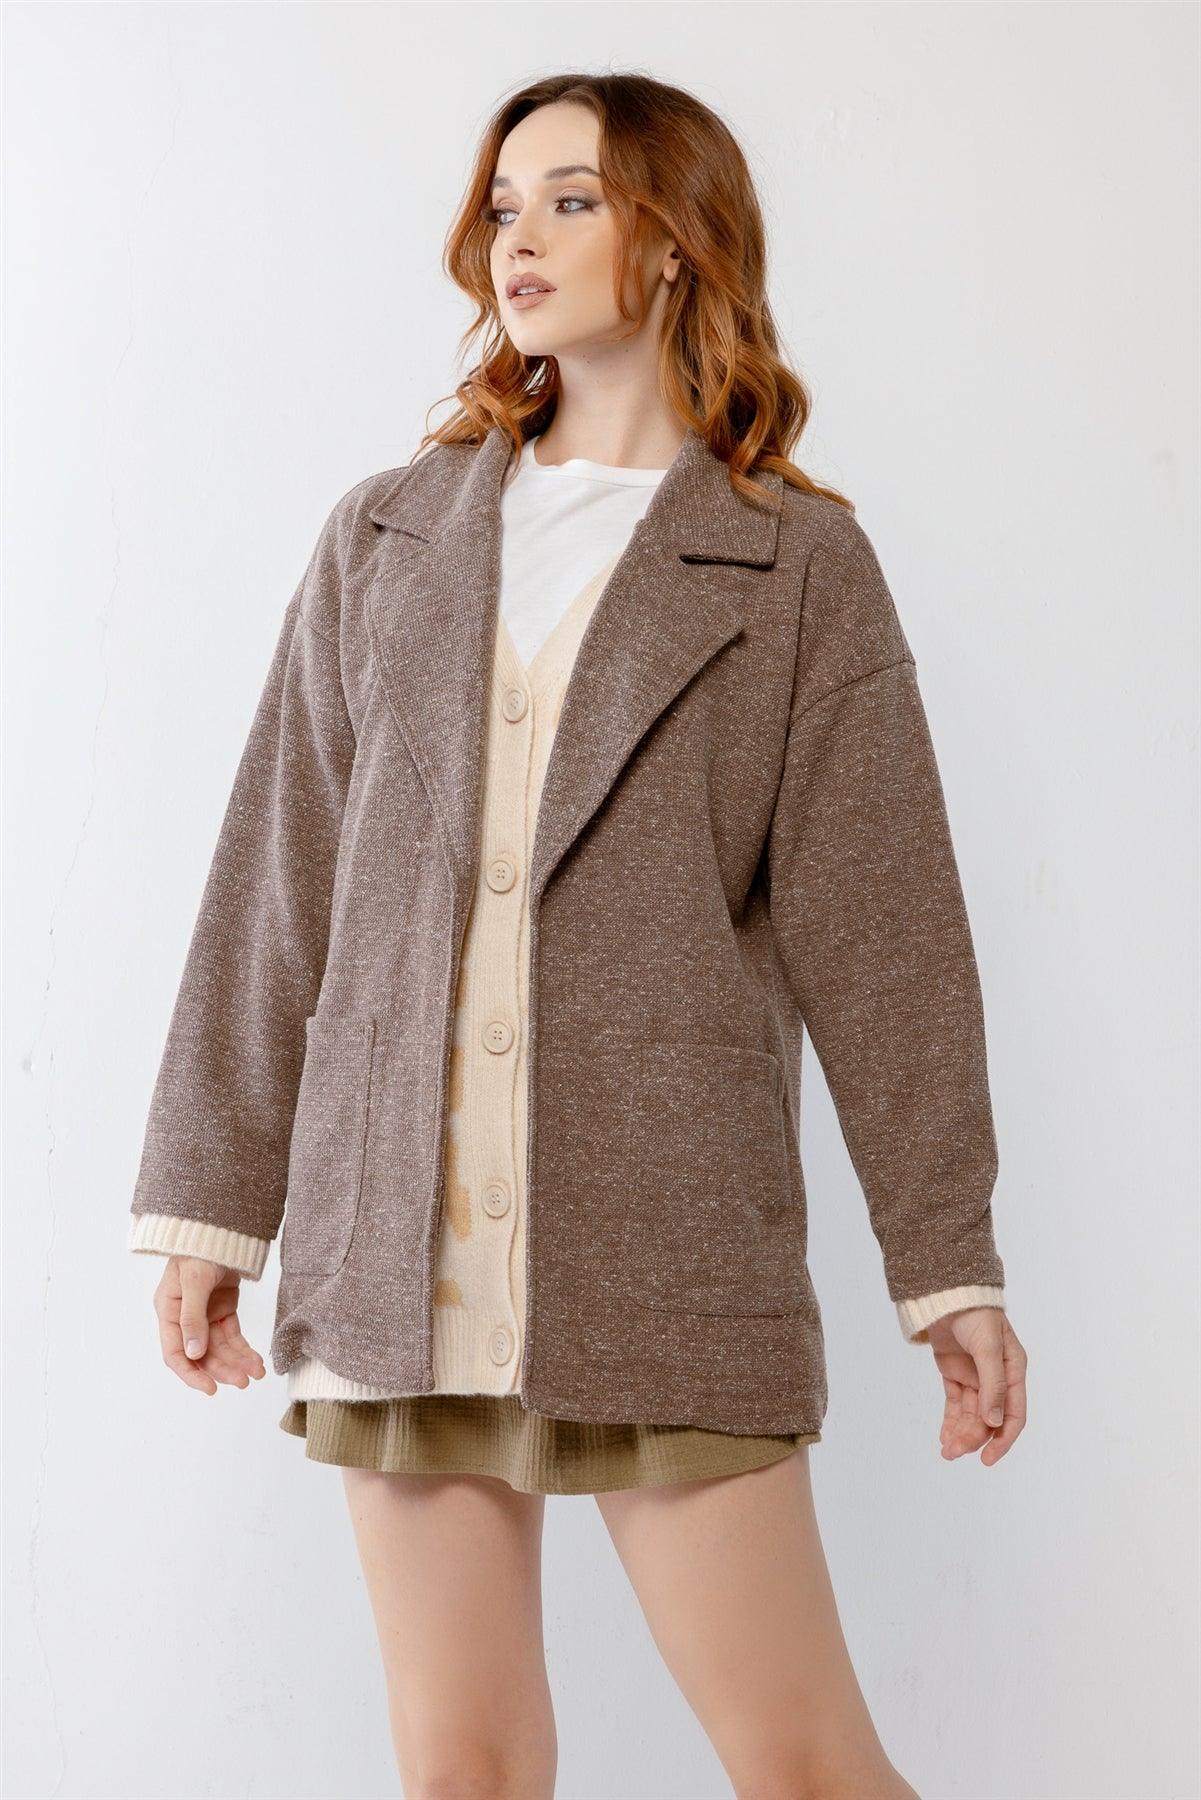 Mocha Knit Collared Two Pocket Open Front Cardigan /2-2-2